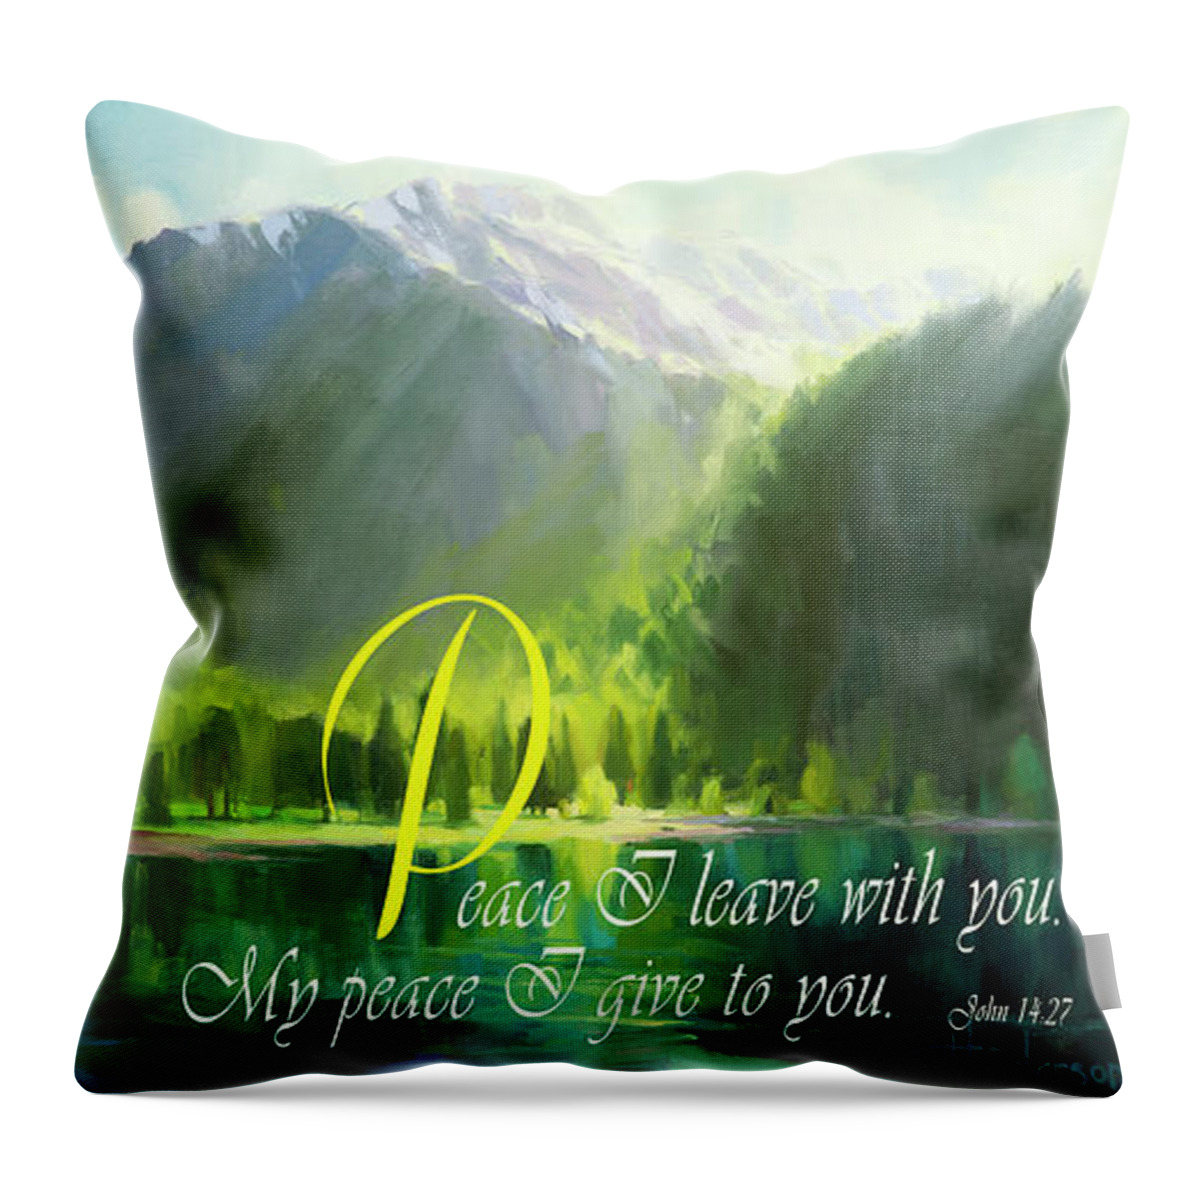 Christian Throw Pillow featuring the digital art Peace I Give You by Steve Henderson